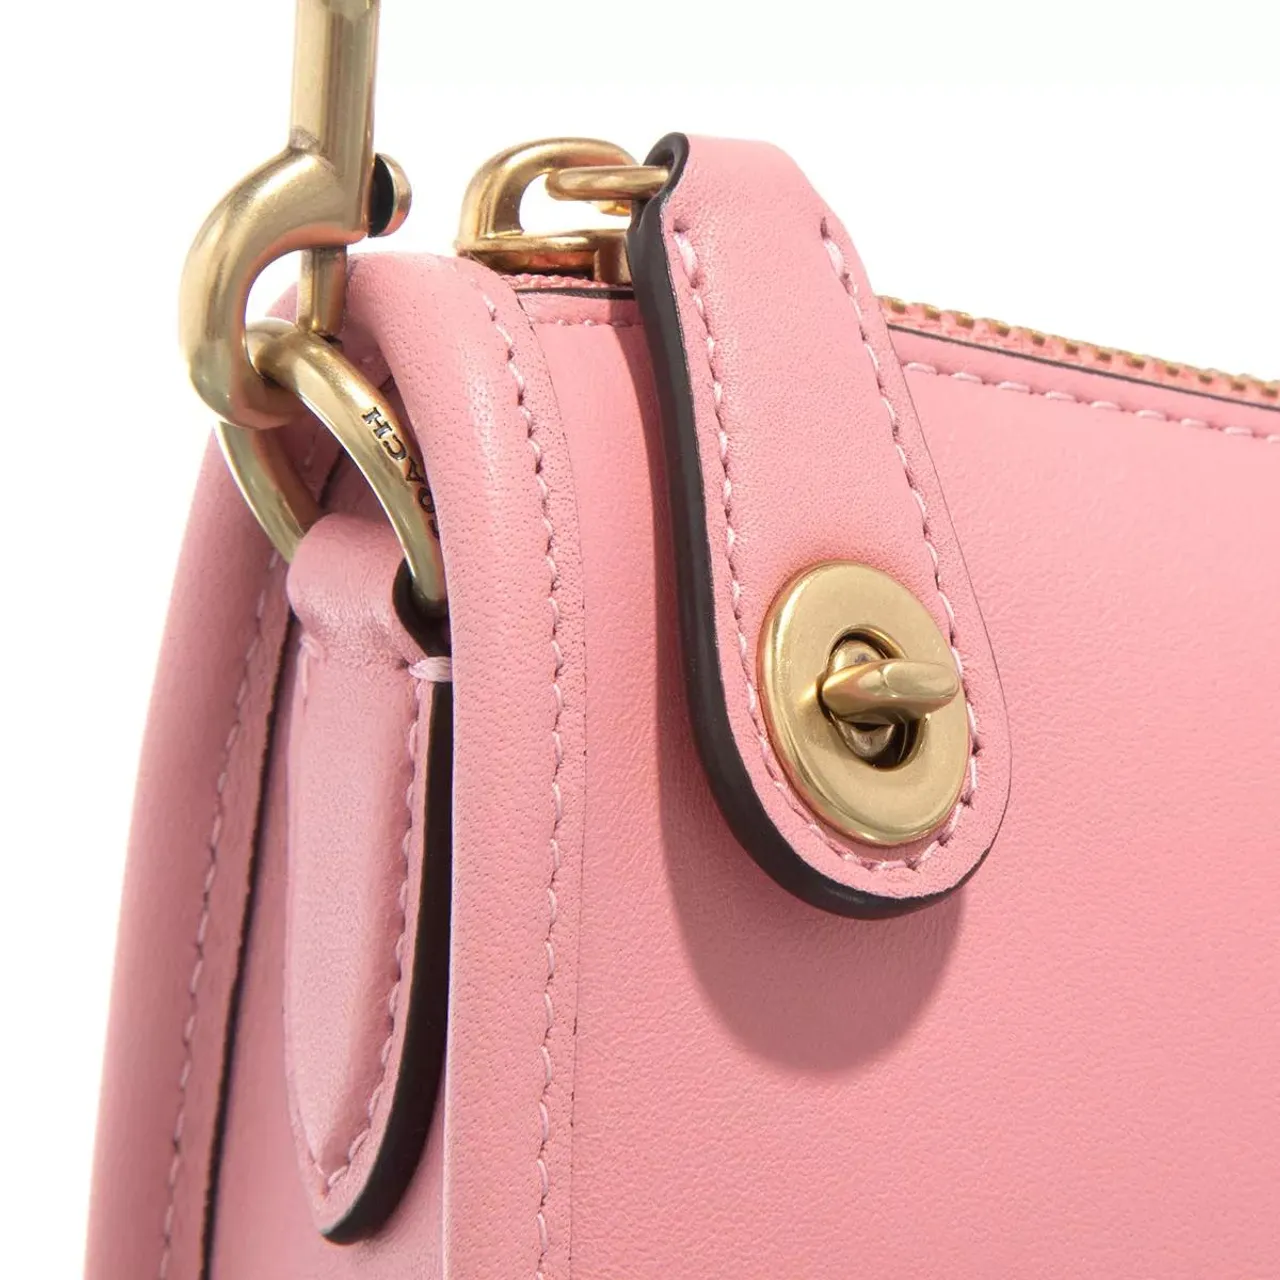 Coach Hobo Bags - The Coach Originals Glovetanned Leather Swinger 20 - rose - Hobo Bags for ladies